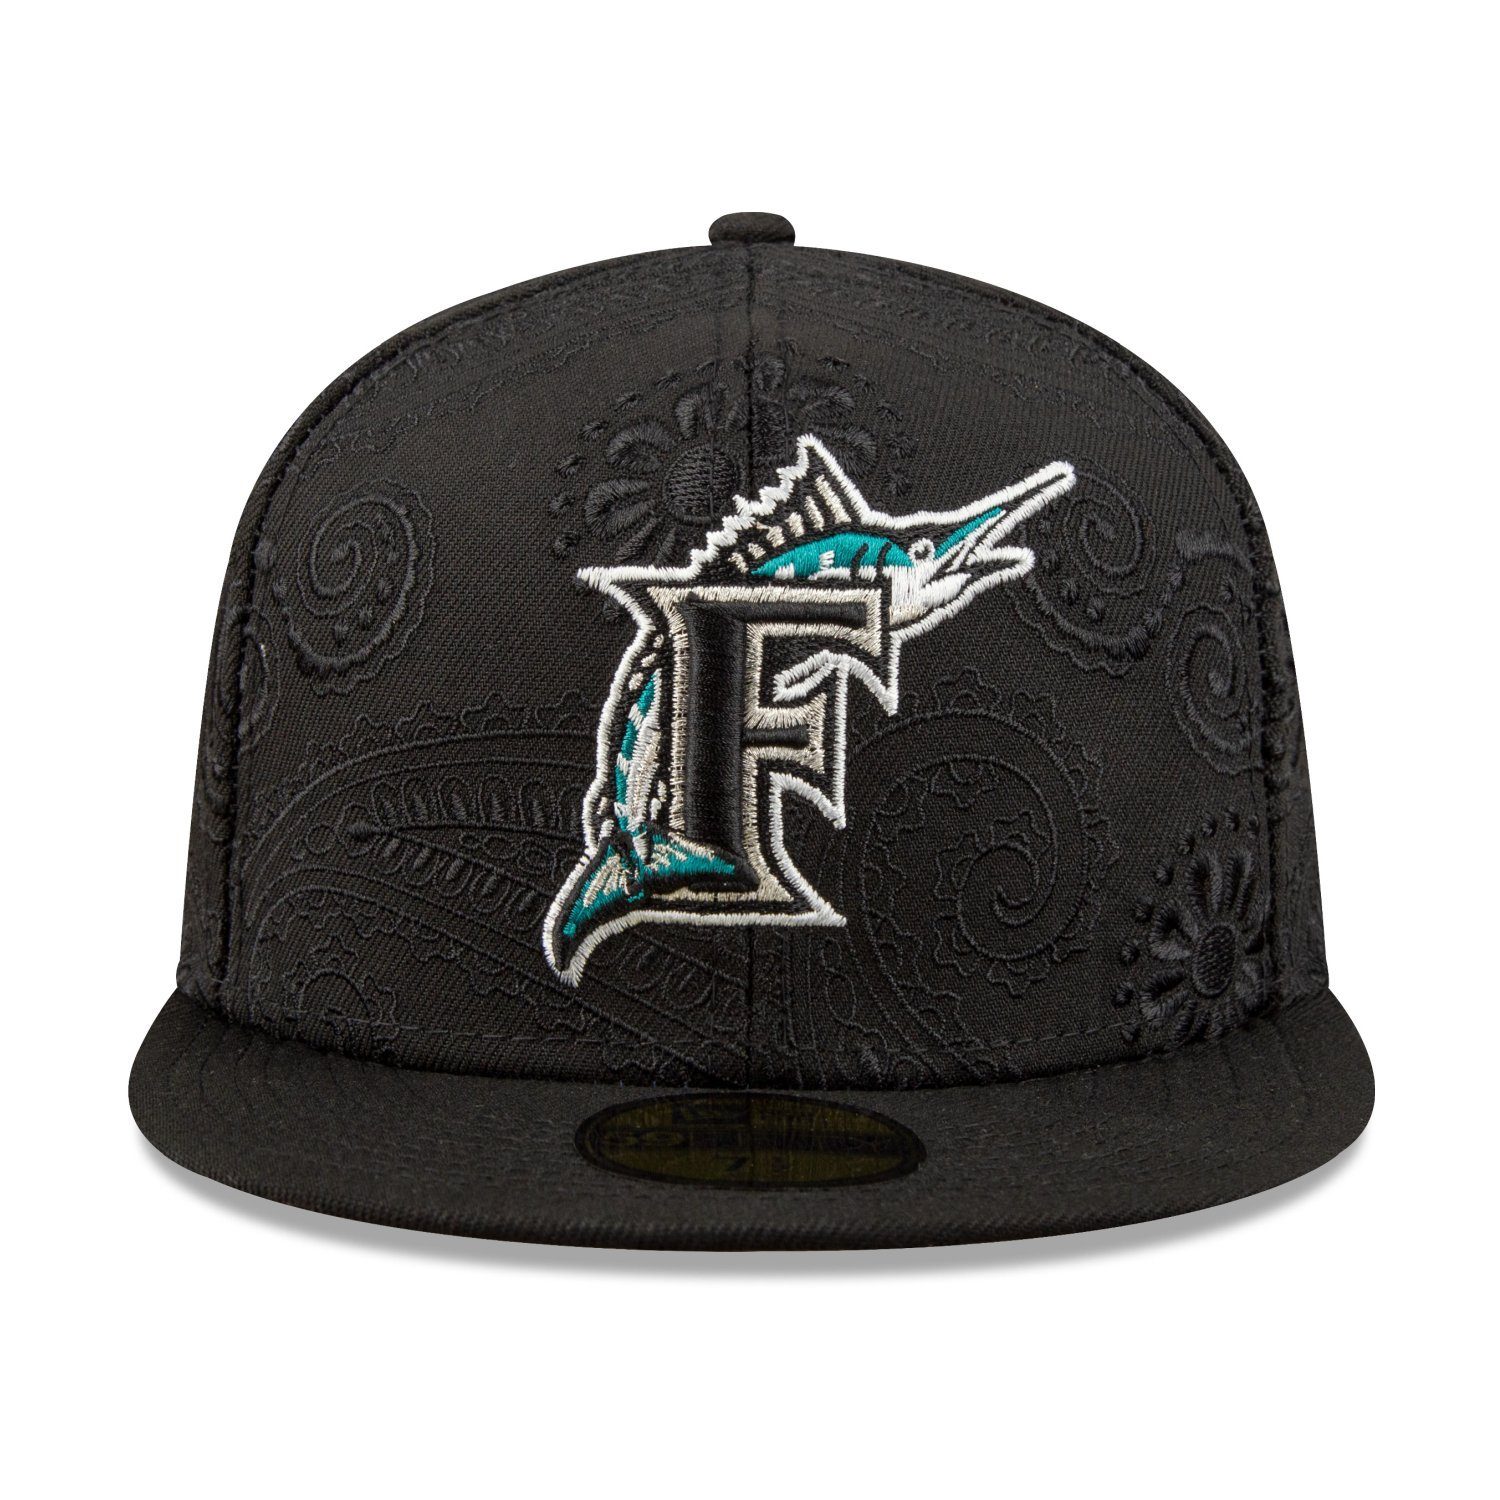 New Era Fitted Cap Miami Marlins 59Fifty PAISLEY SWIRL